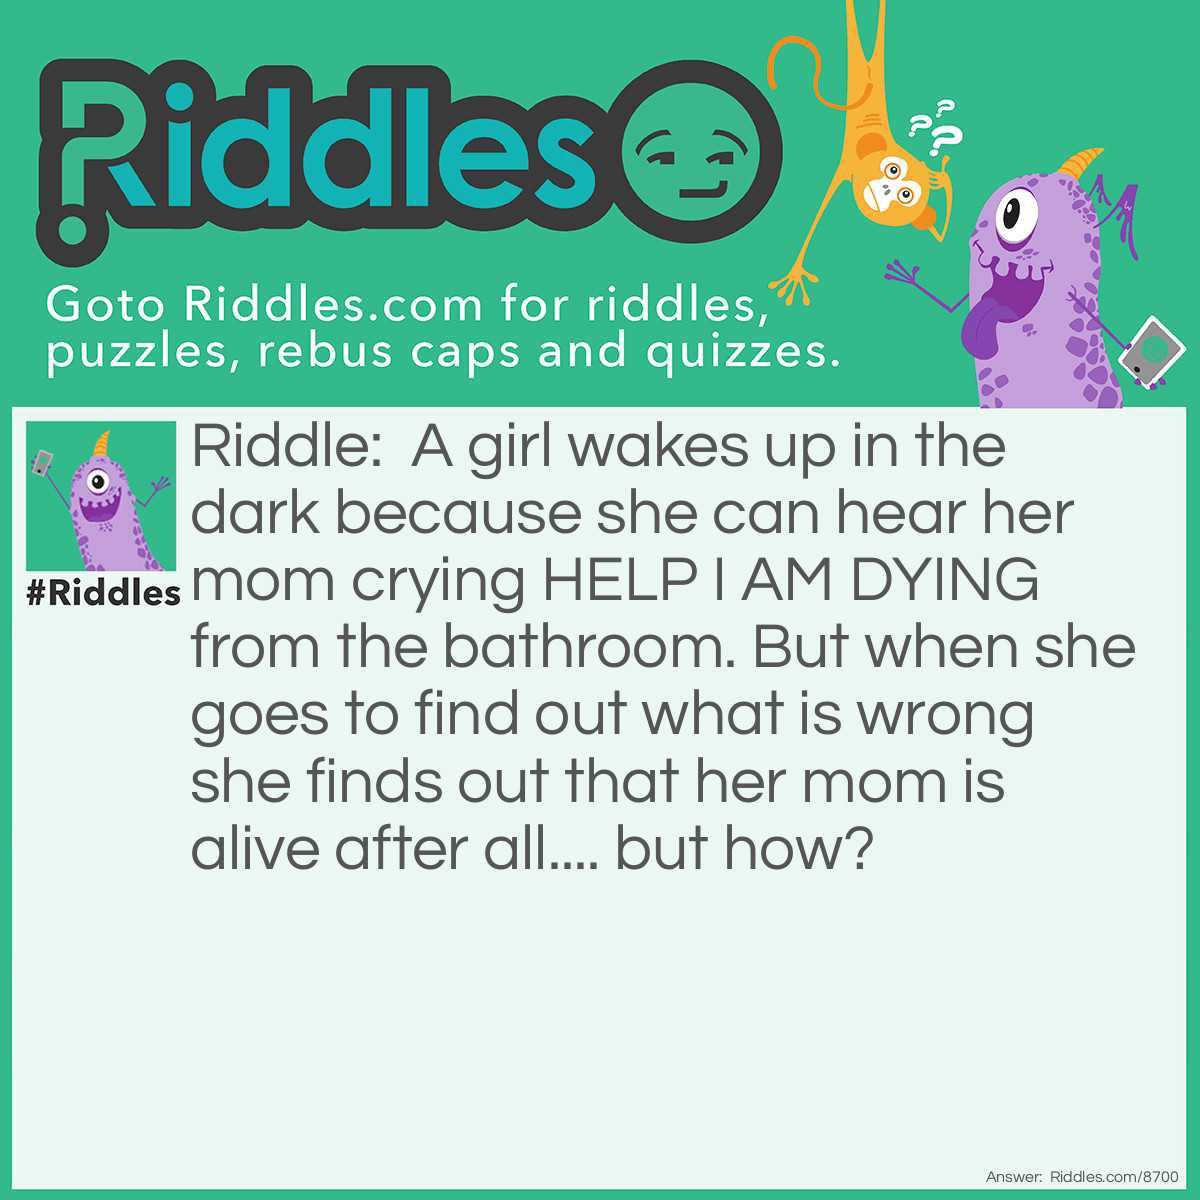 Riddle: A girl wakes up in the dark because she can hear her mom crying HELP I AM DYING from the bathroom. But when she goes to find out what is wrong she finds out that her mom is alive after all.... but how? Answer: Her mom was washing her hair but she couldnt see in the dark and used up some hair die by accident.